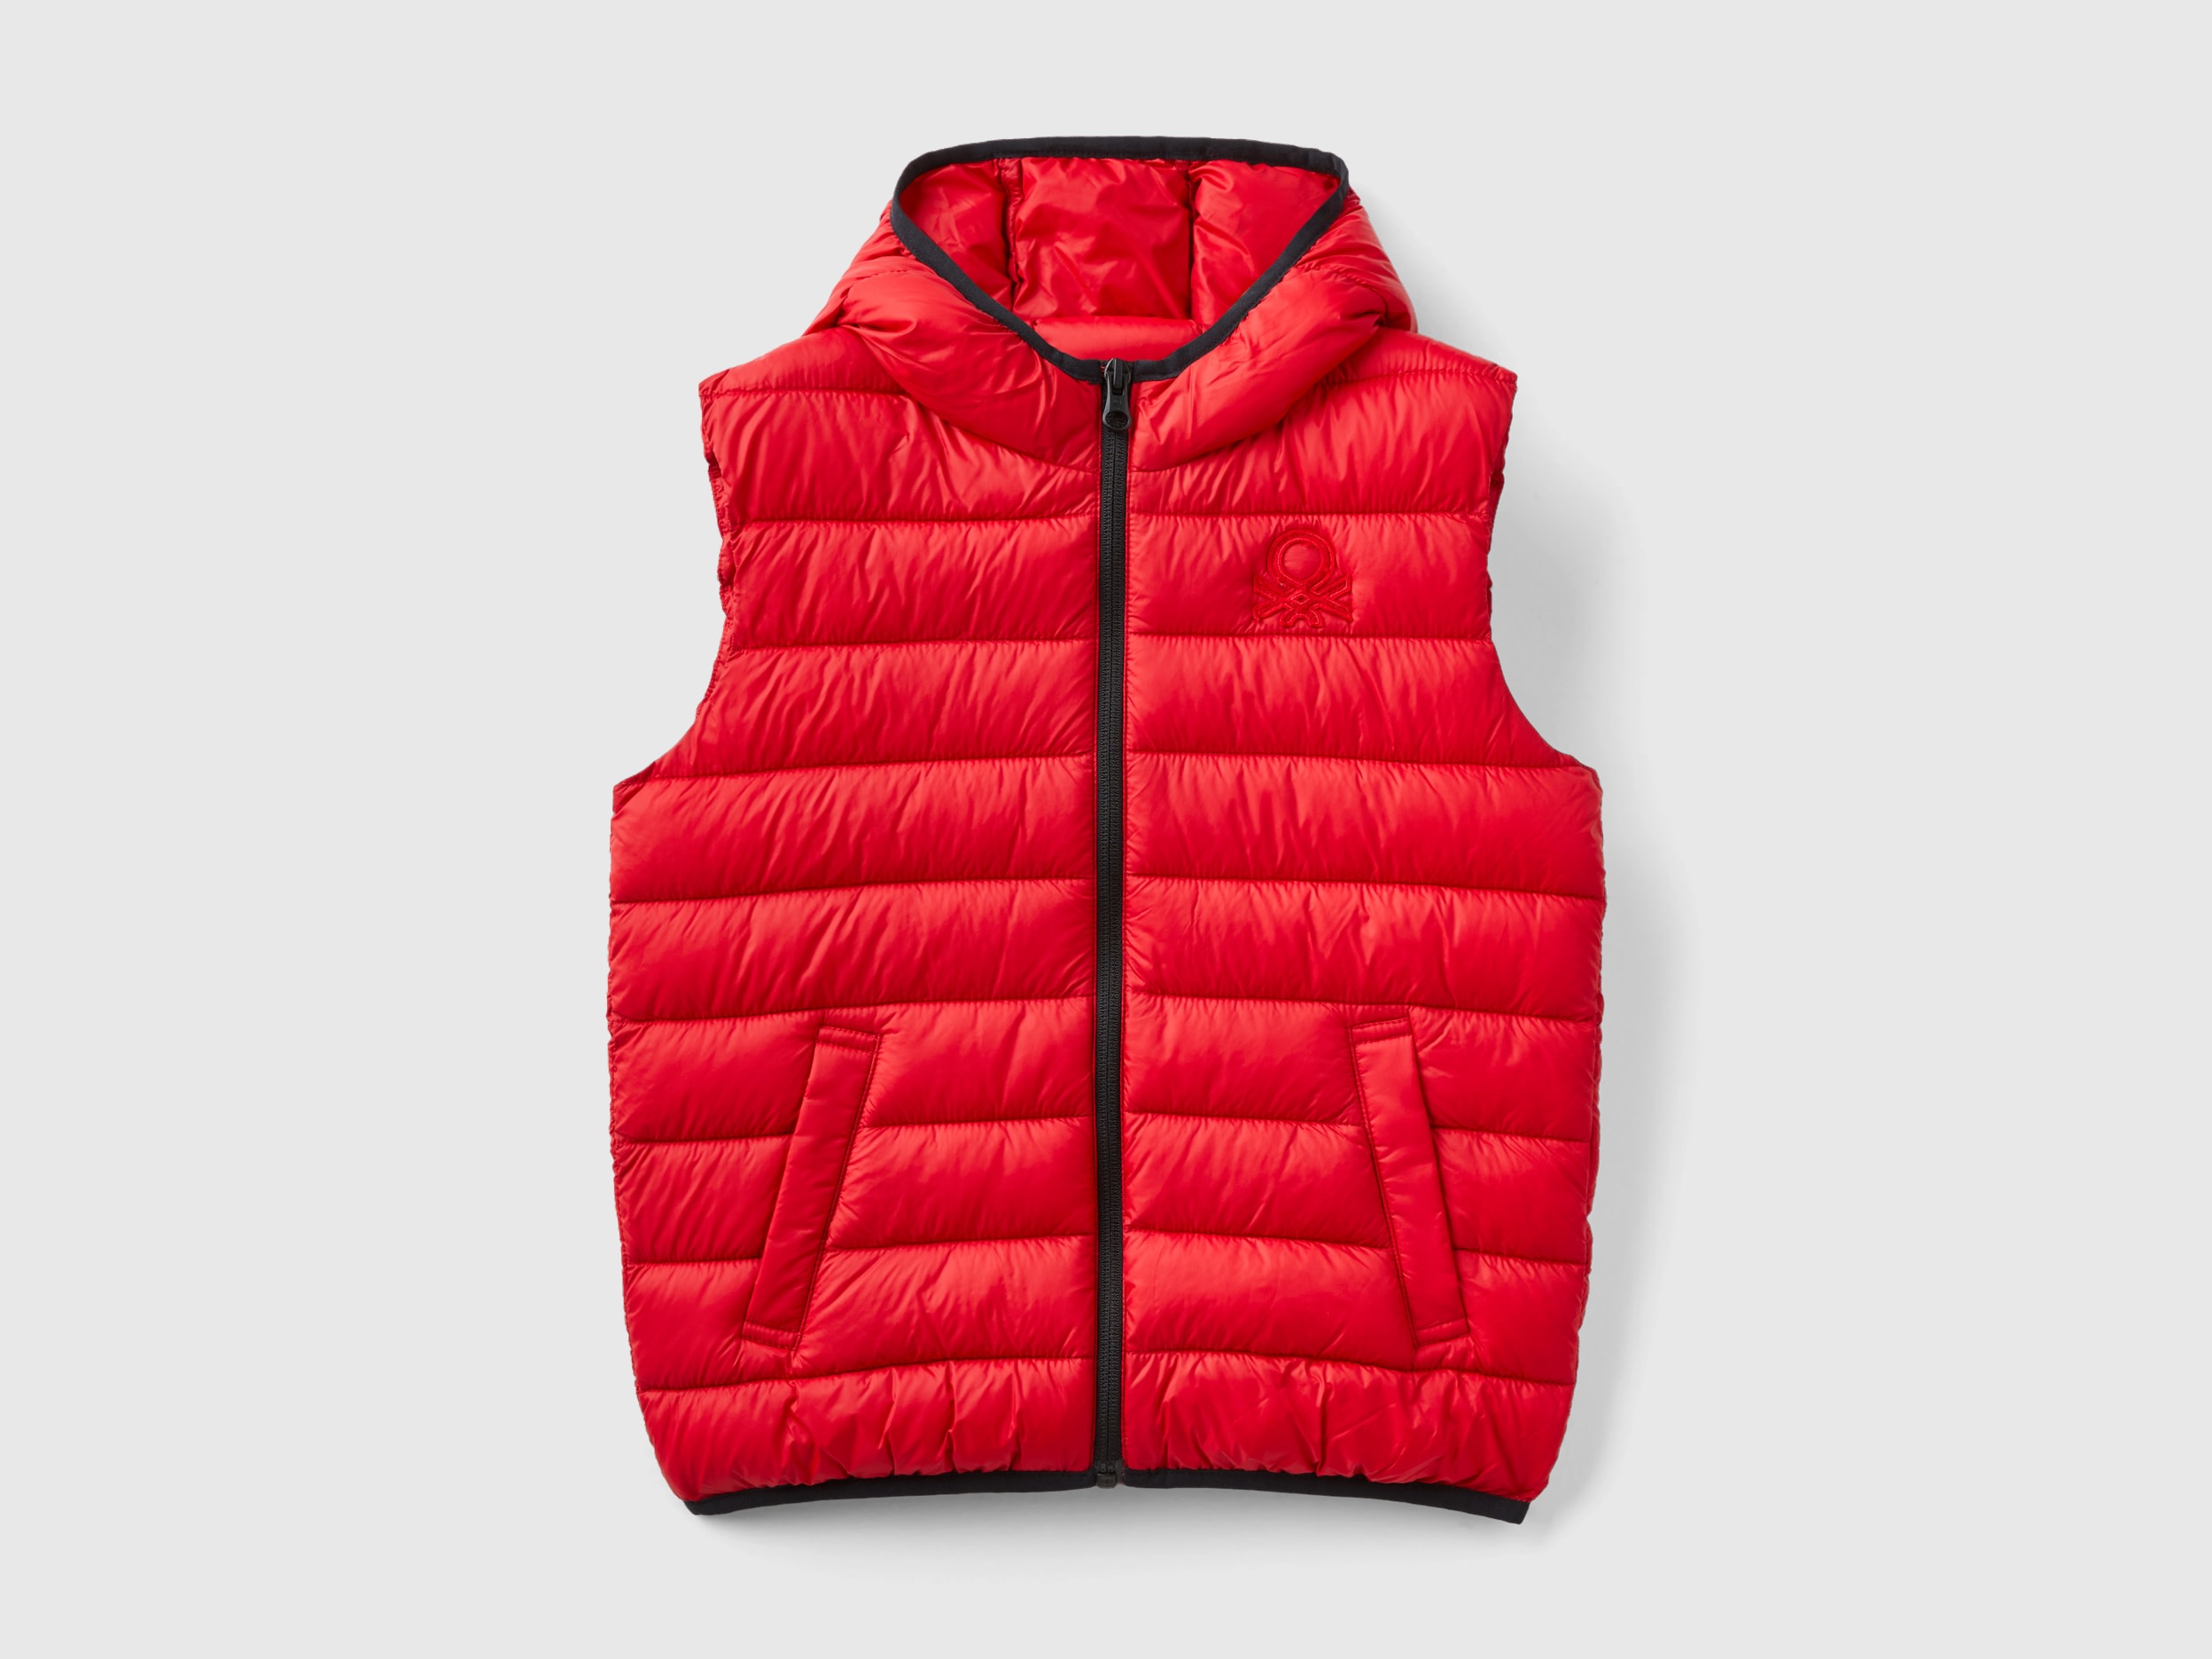 Benetton, Padded Jacket With Hood, size L, Red, Kids